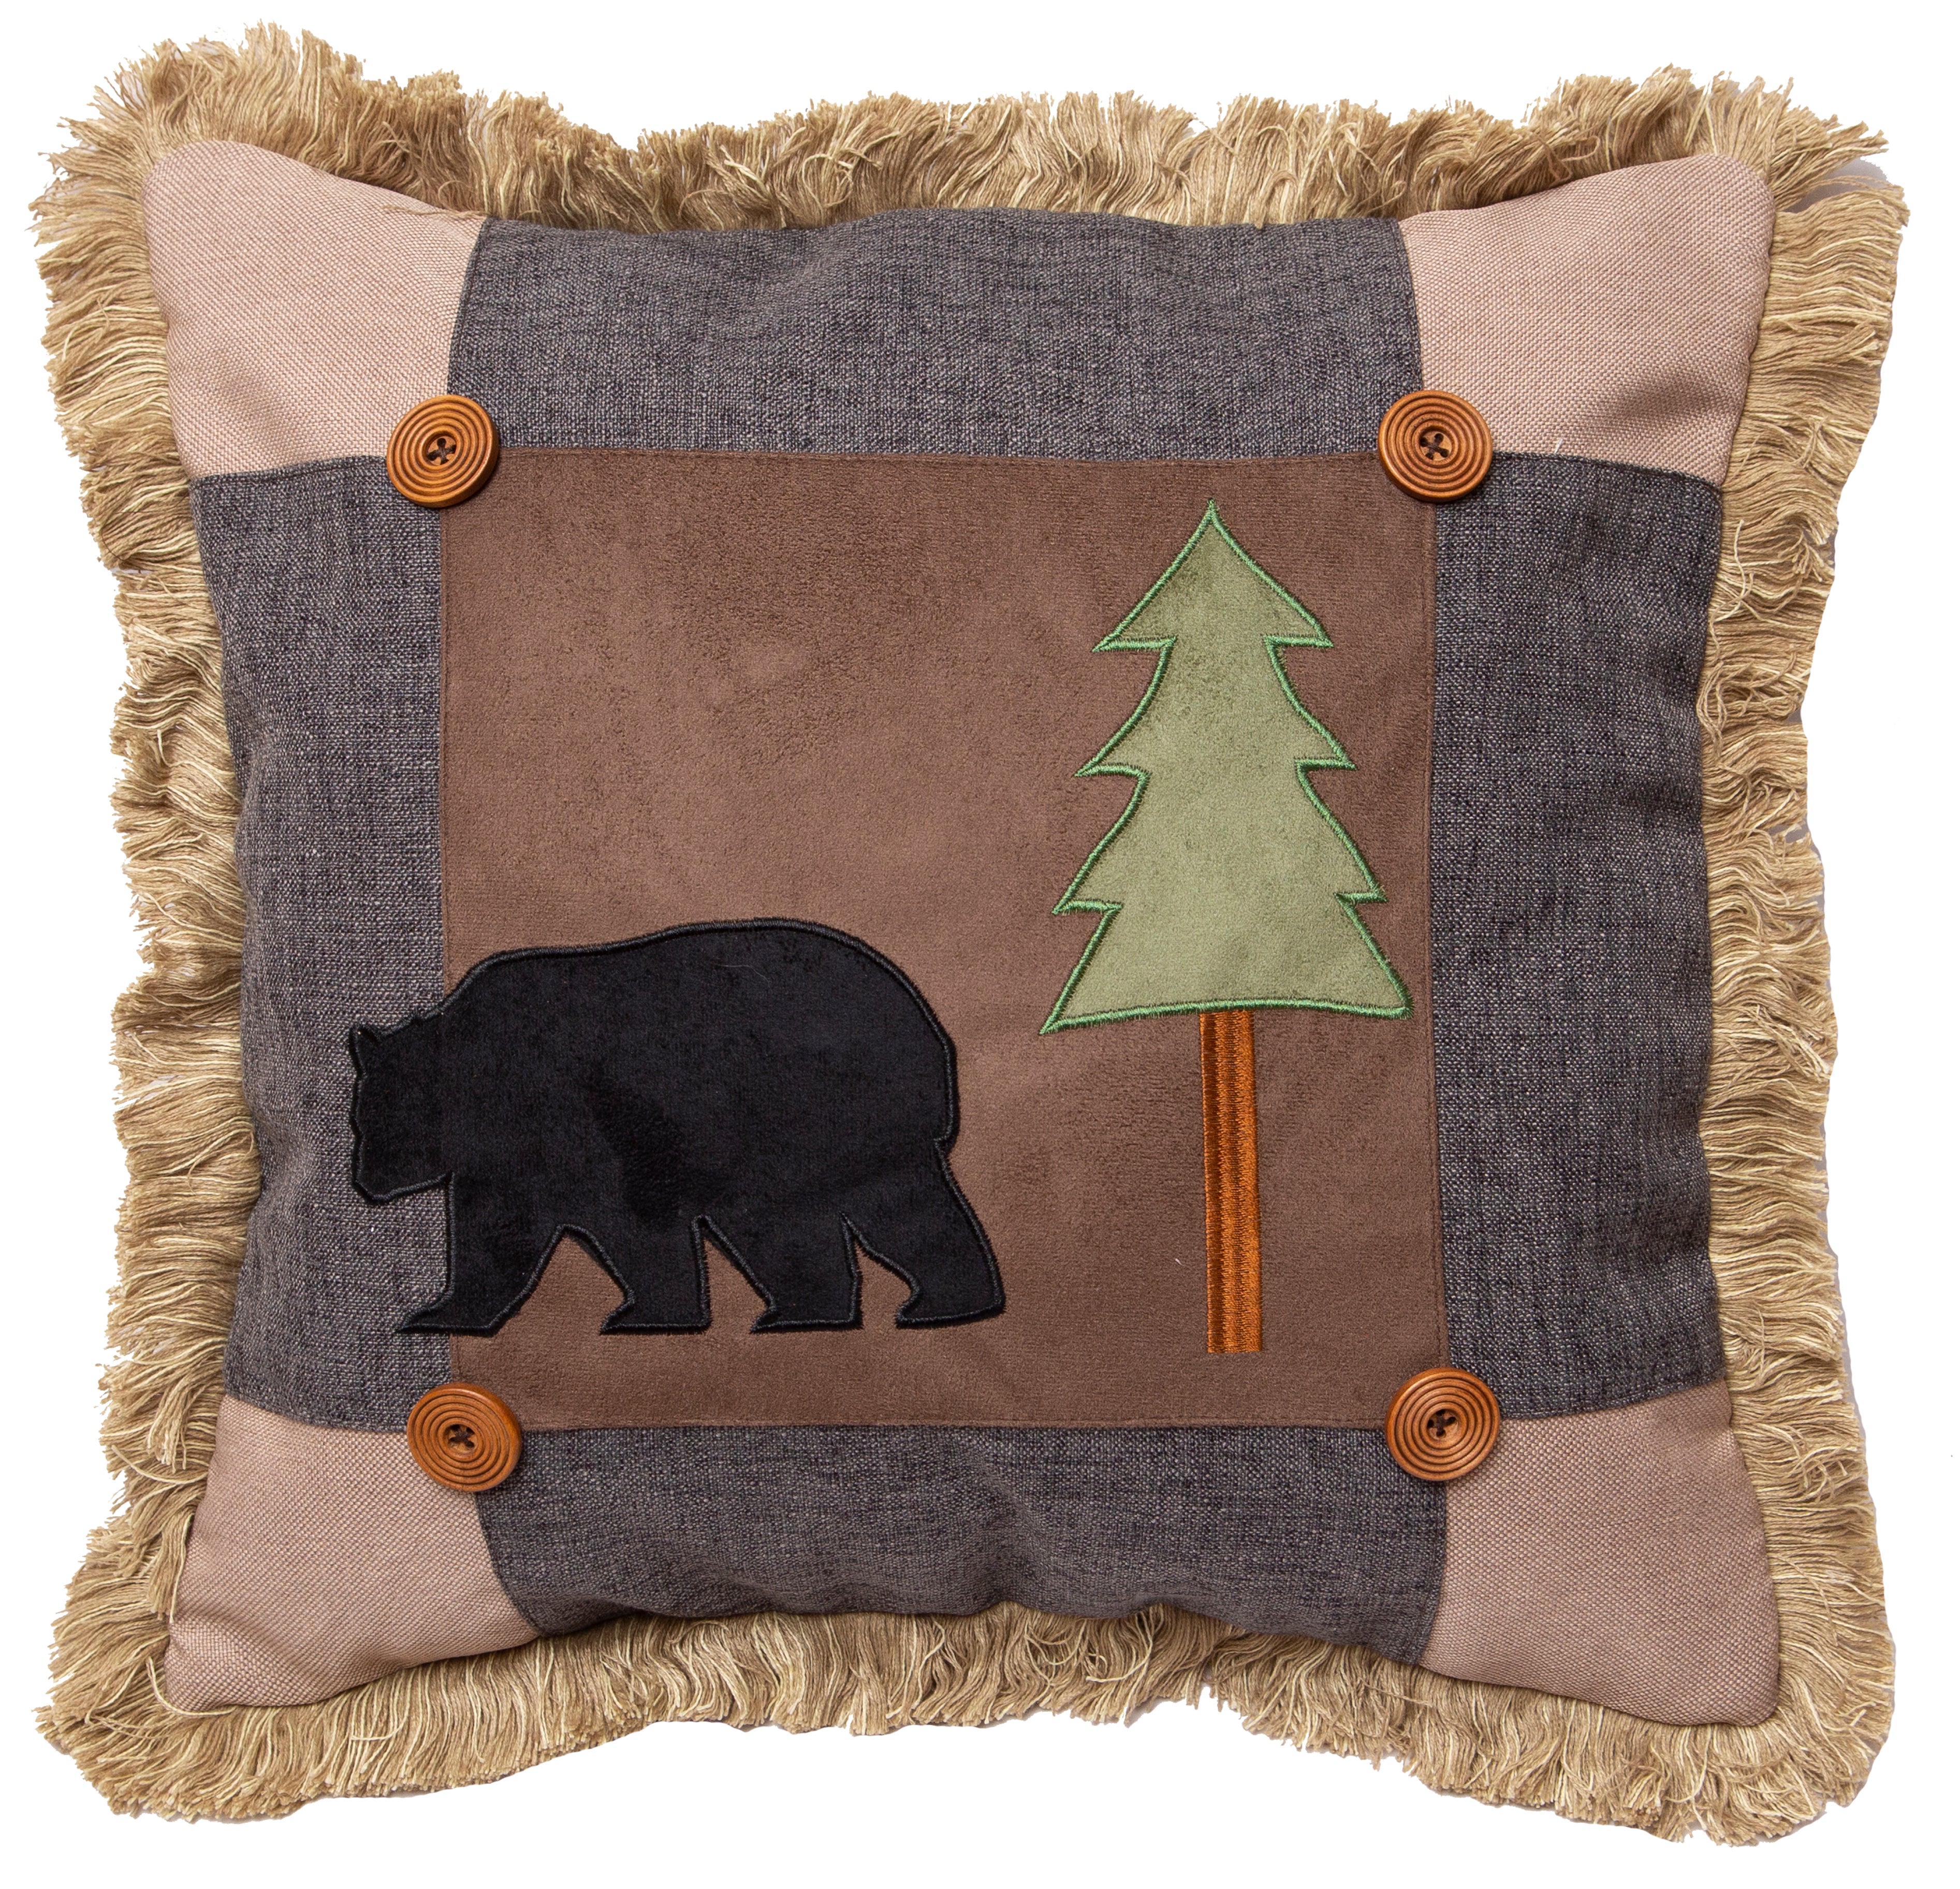 Rustic Western Bear Throw Pillows Cover 18x18 Inch Pack Of 2 Wildlife Bear  Cabin